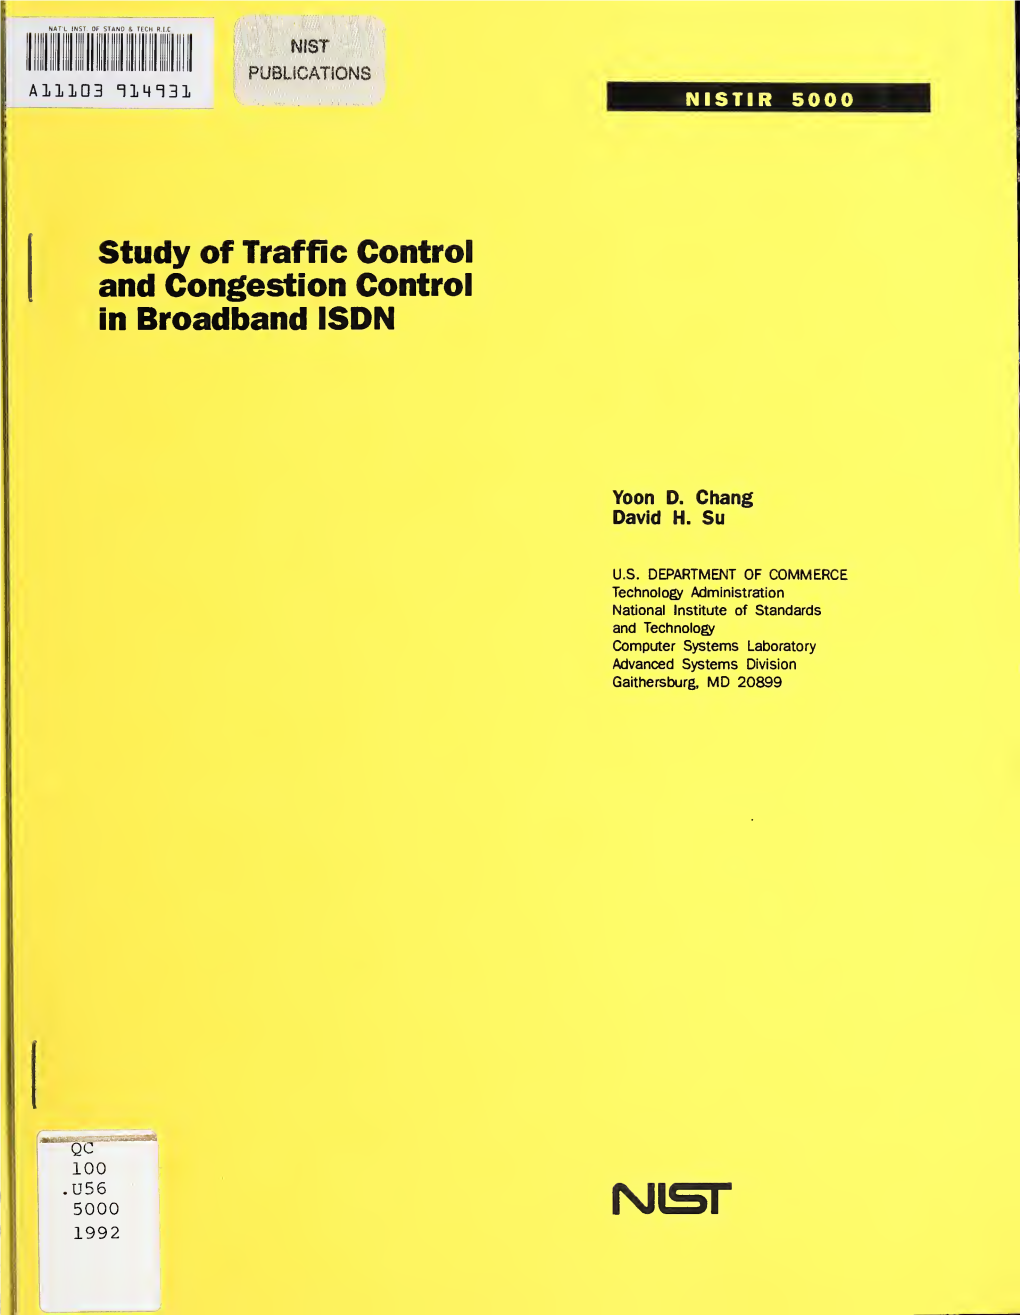 Study of Traffic Control and Congestion Control in Broadband ISDN